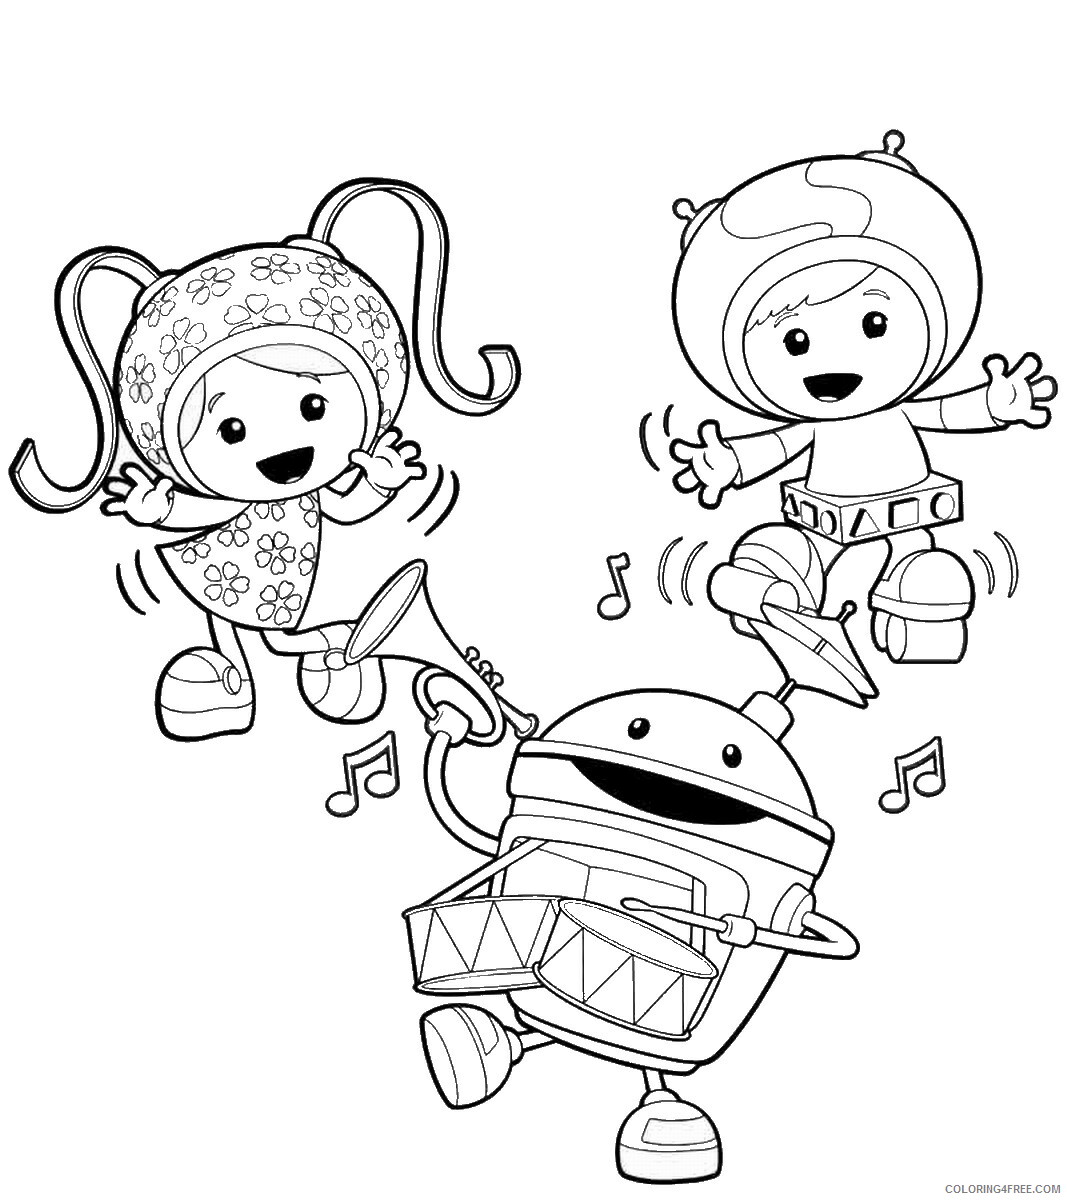 Team Umizoomi Coloring Pages TV Film Team Umizoomi 06 Printable 2020 08443 Coloring4free